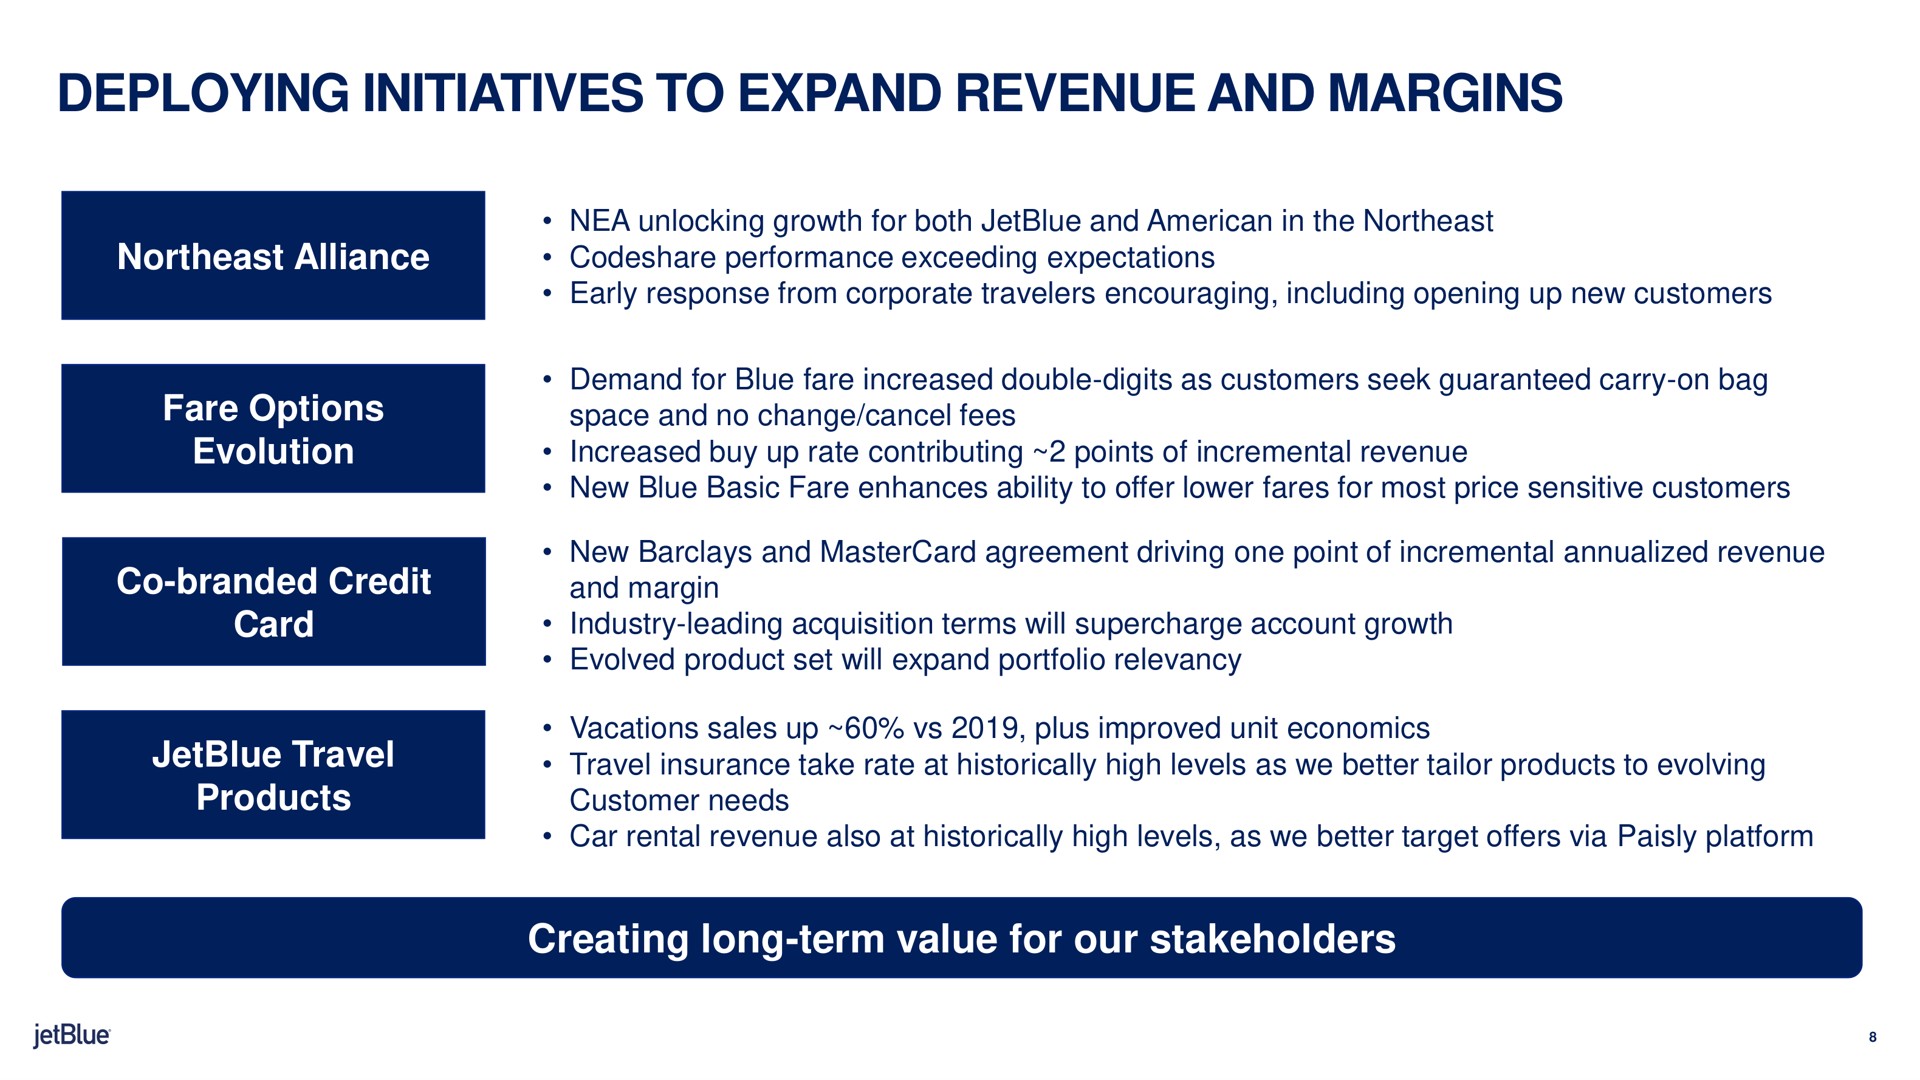 deploying initiatives to expand revenue and margins northeast alliance fare options evolution branded credit card travel products creating long term value for our stakeholders performance exceeding expectations margin net insurance take rate at historically high levels as we better tailor evolving customer needs | jetBlue